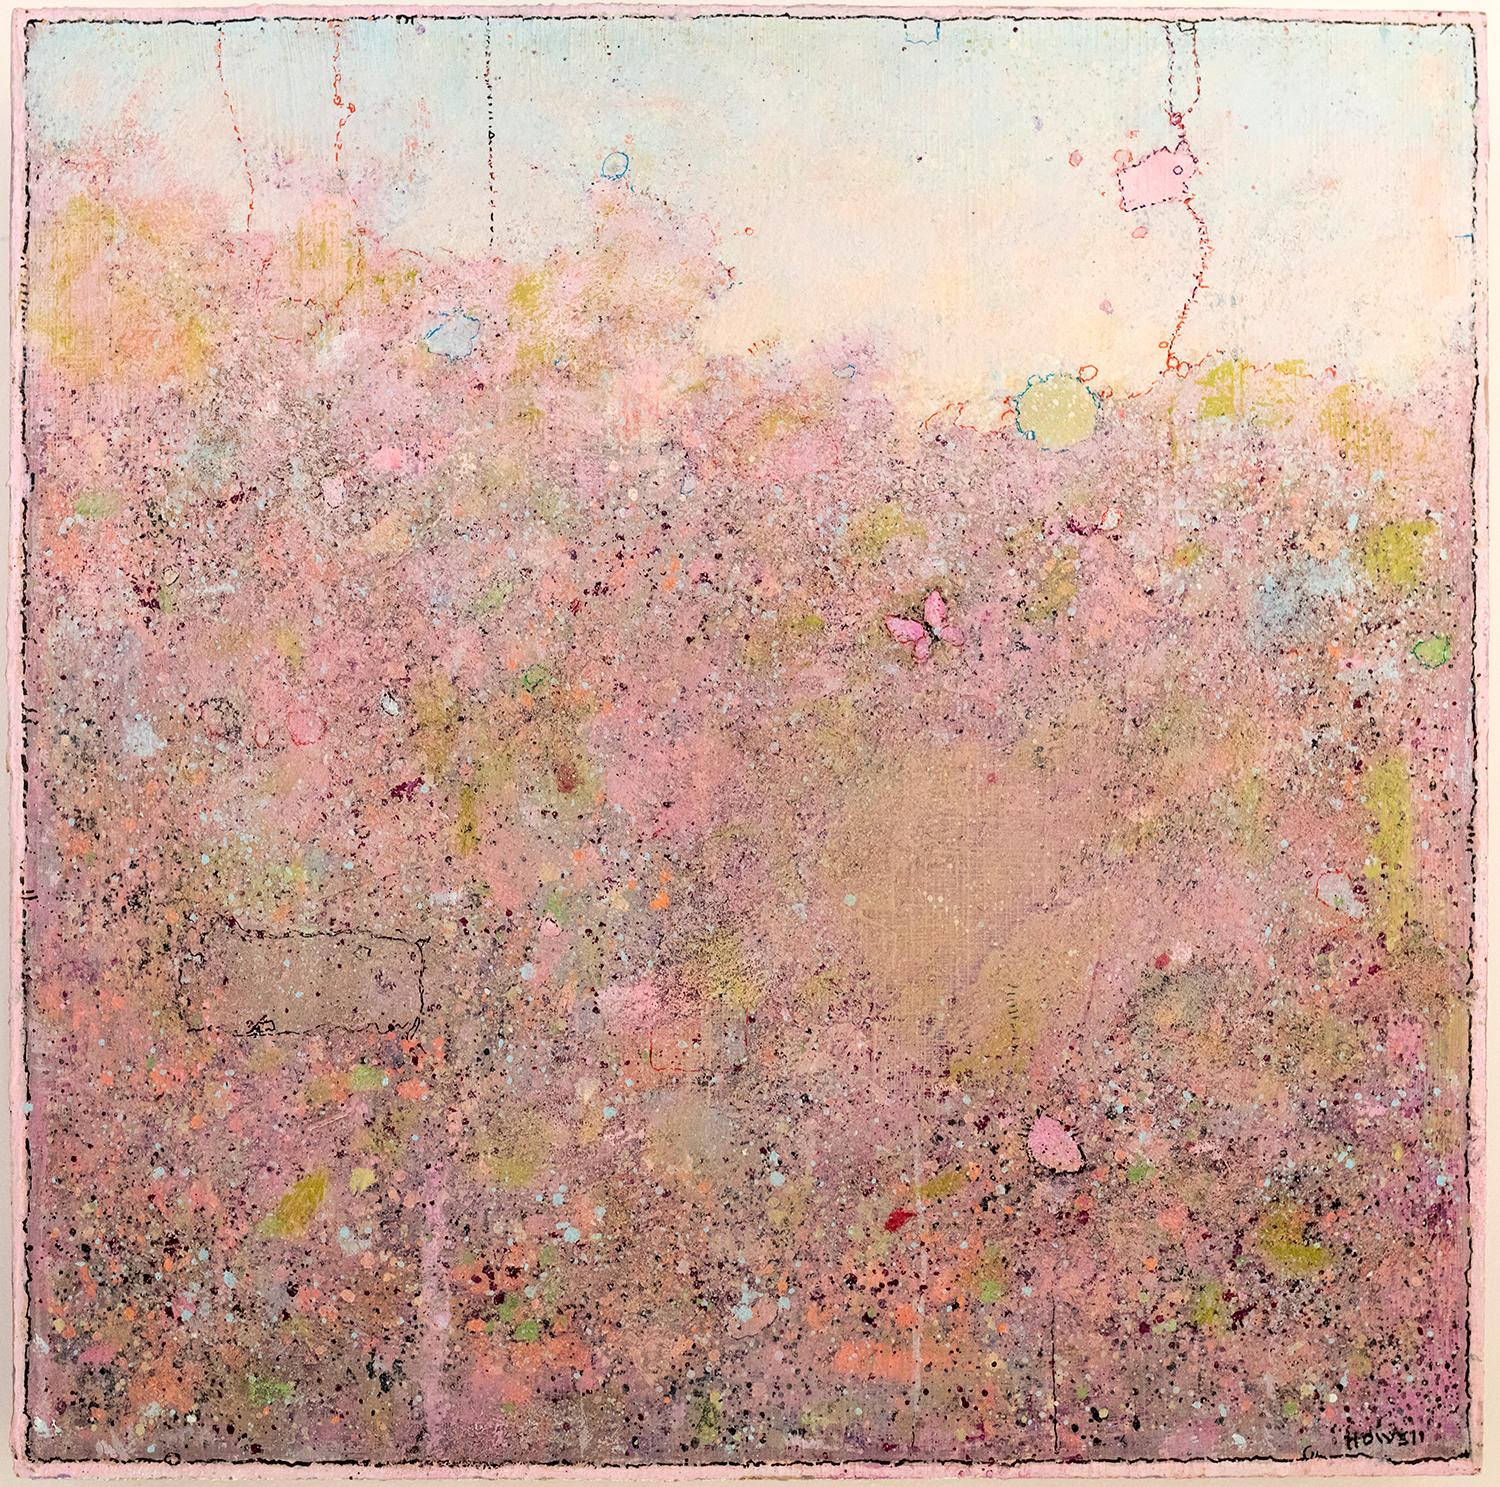 Elwood Howell Landscape Painting - 'Pink Butterfly', Minimalist Abstract Contemporary Landscape Acrylic Painting